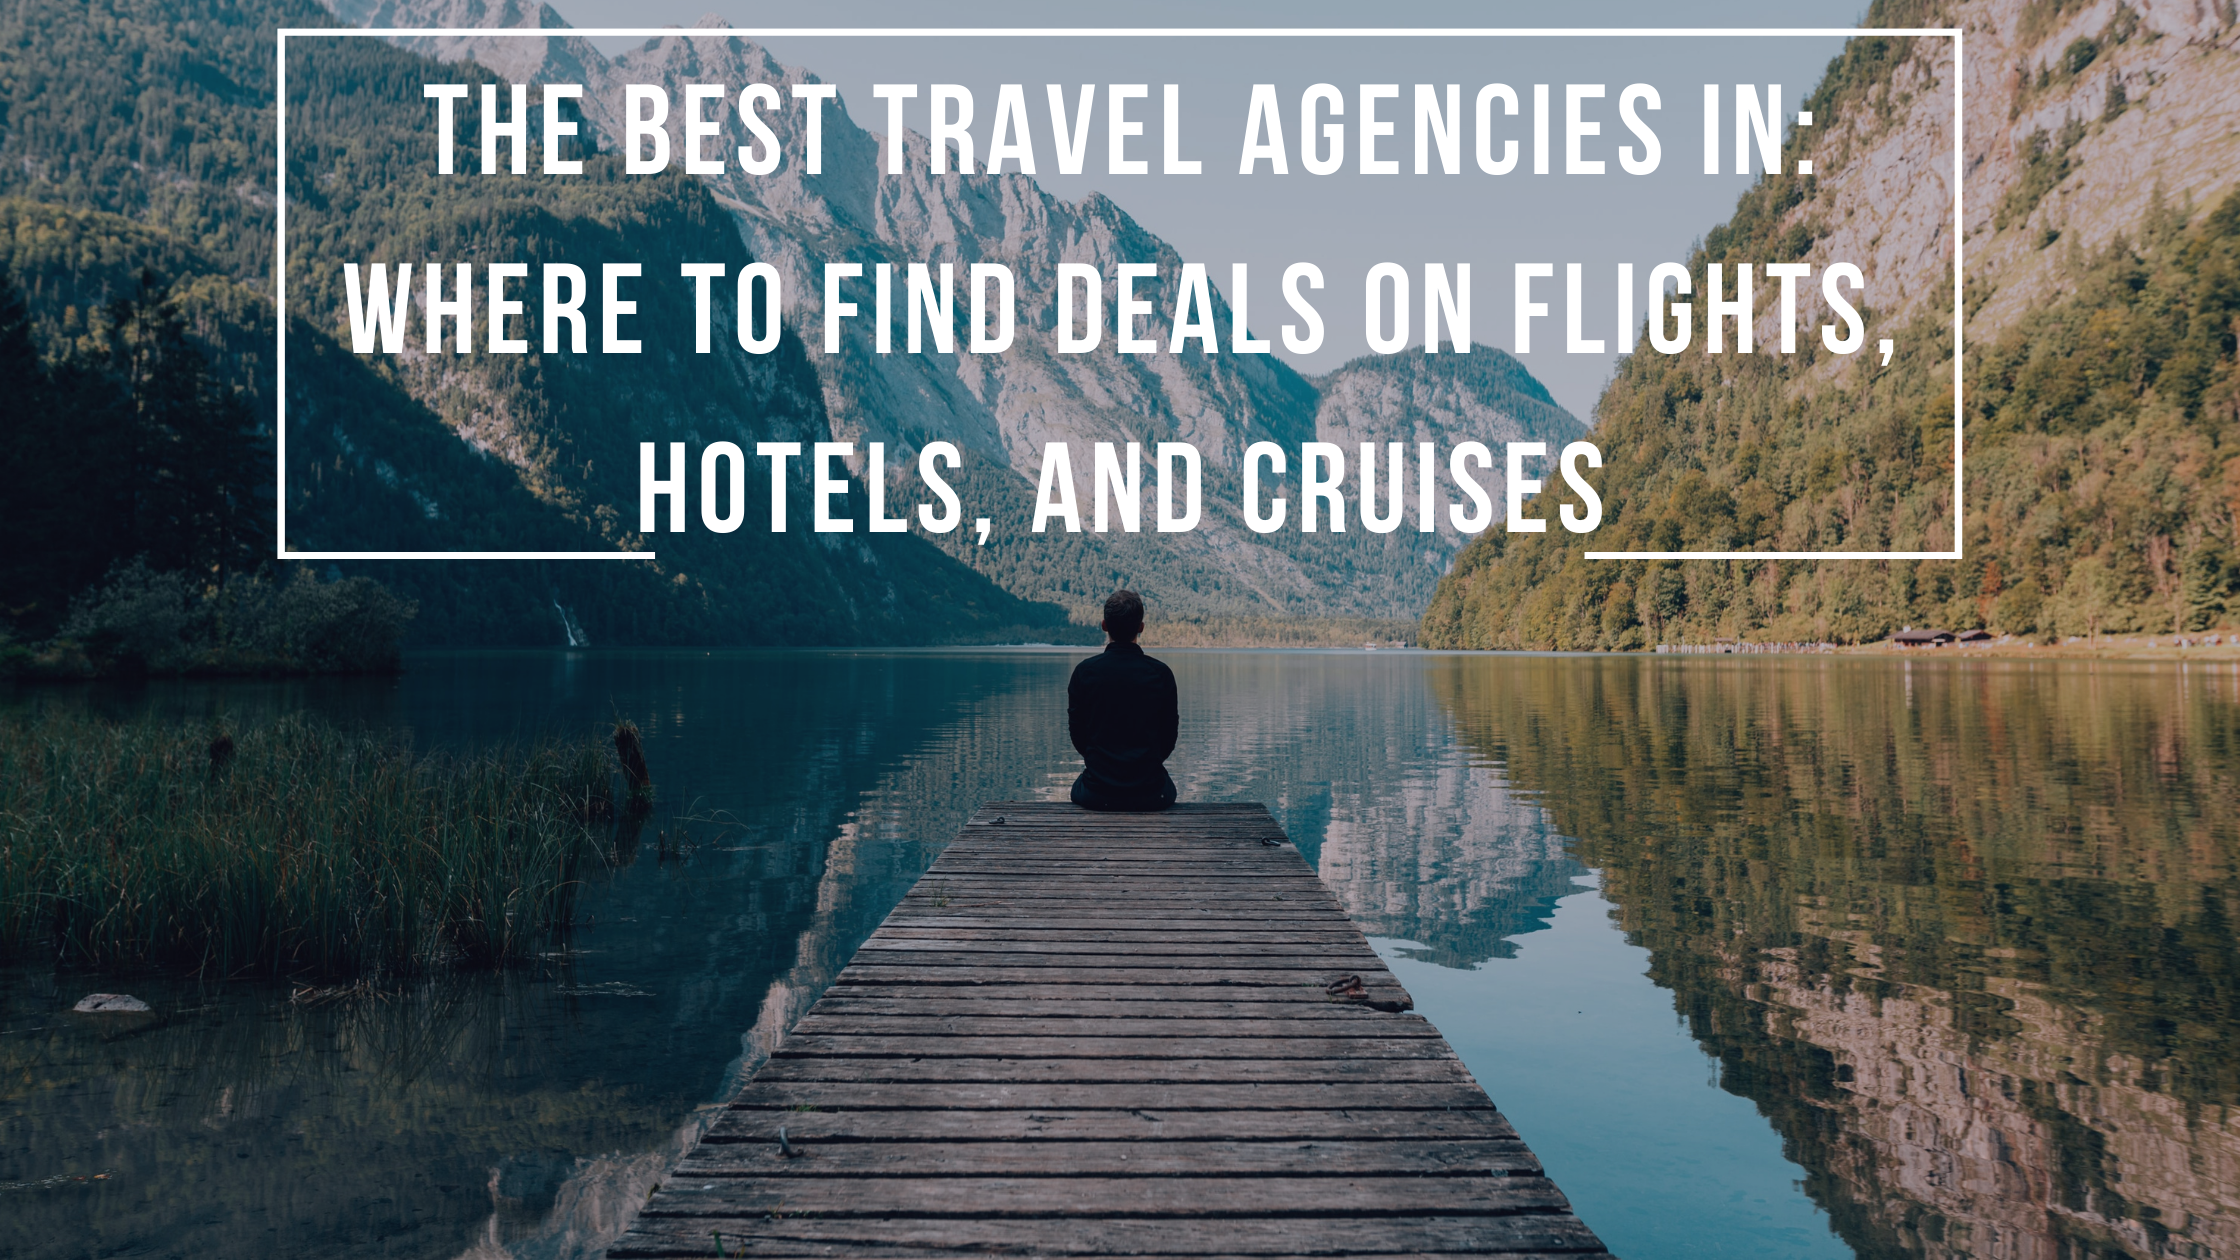 The Best Travel Agency In: Where to Find Deals On Flights, Hotels, And Cruises